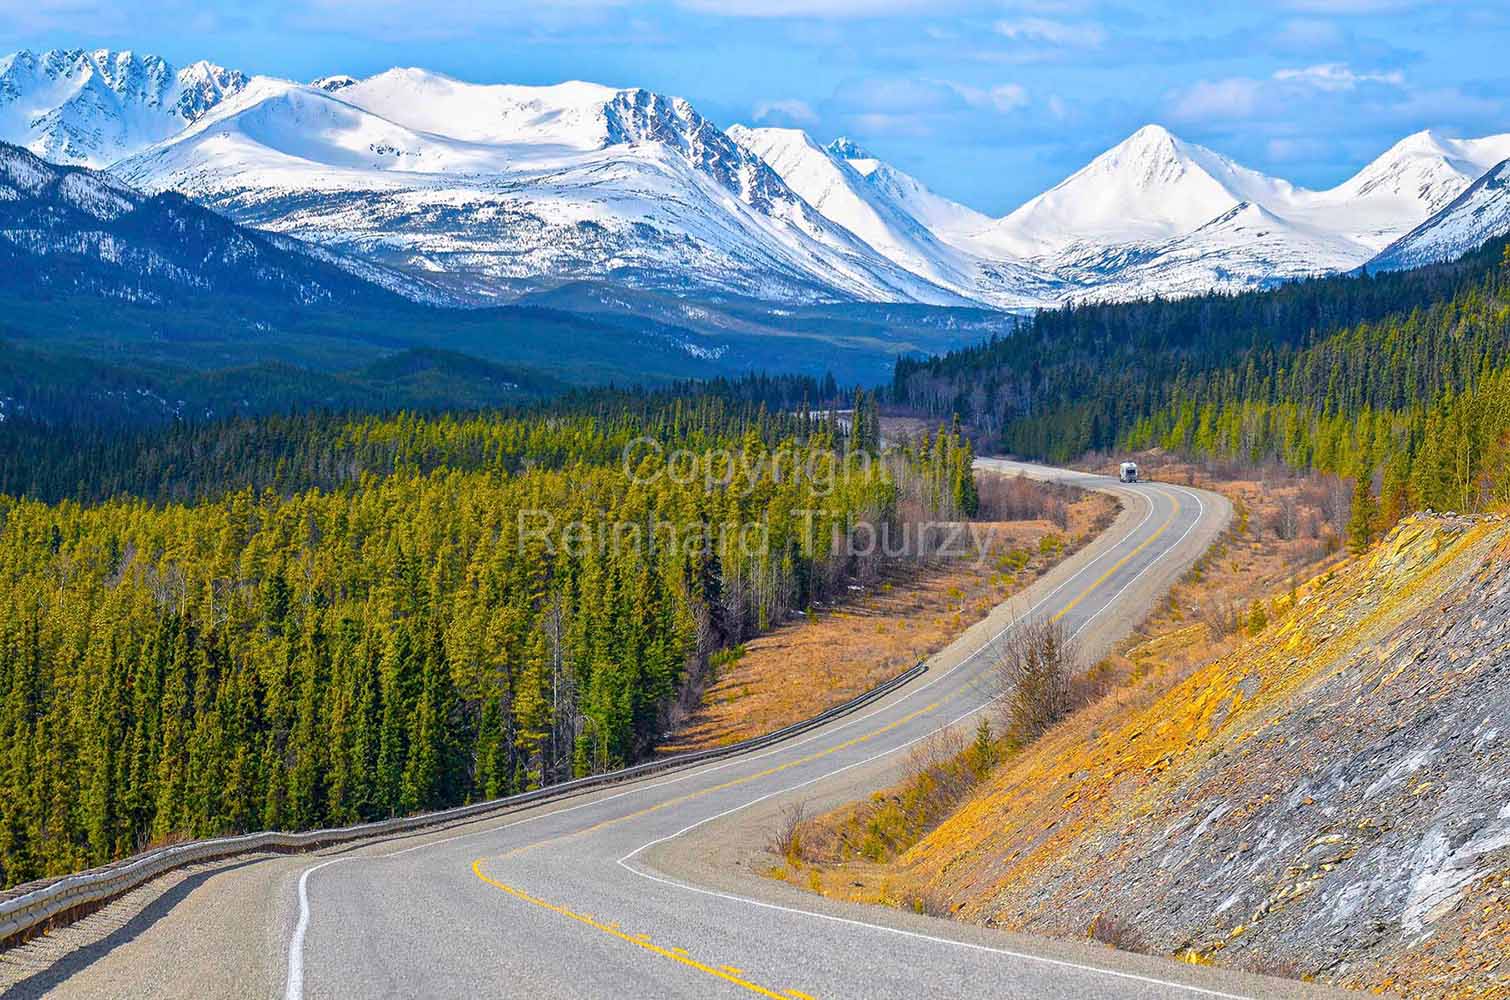 Alaska_Highway_Yukon_Canada_snow covered_mountains_conifer_woods